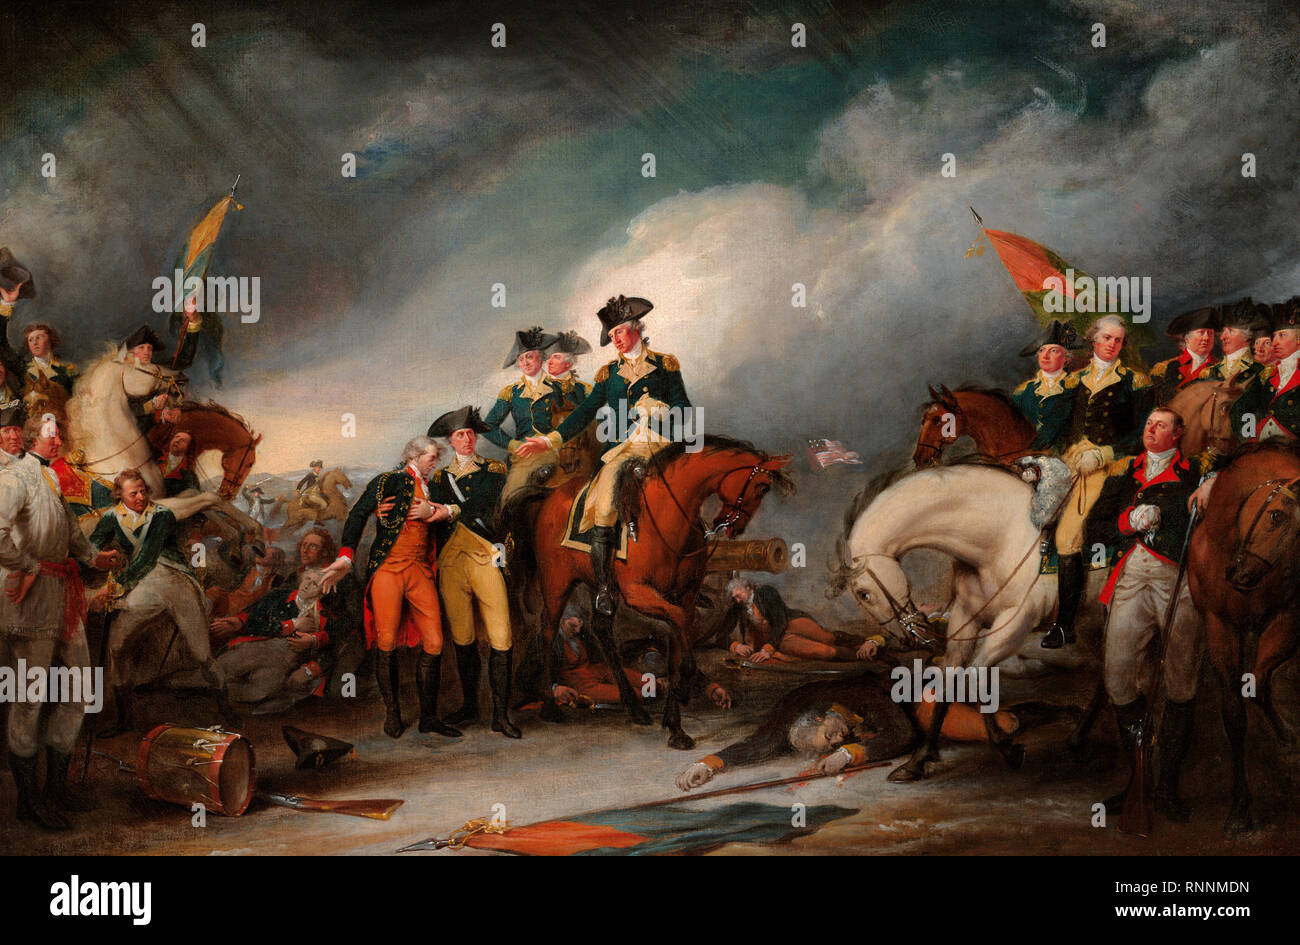 The Capture of the Hessians at Trenton, December 26, 1776 celebrates the important victory by General George Washington at the Battle of Trenton. In the center of the painting, Washington is focused on the needs of the mortally wounded Hessian Colonel Johann Rall. On the left, the severely wounded Lieutenant James Monroe is helped by Dr. John RIker. On the right is Major General Nathanael Greene on horseback. John Trumbull Stock Photo